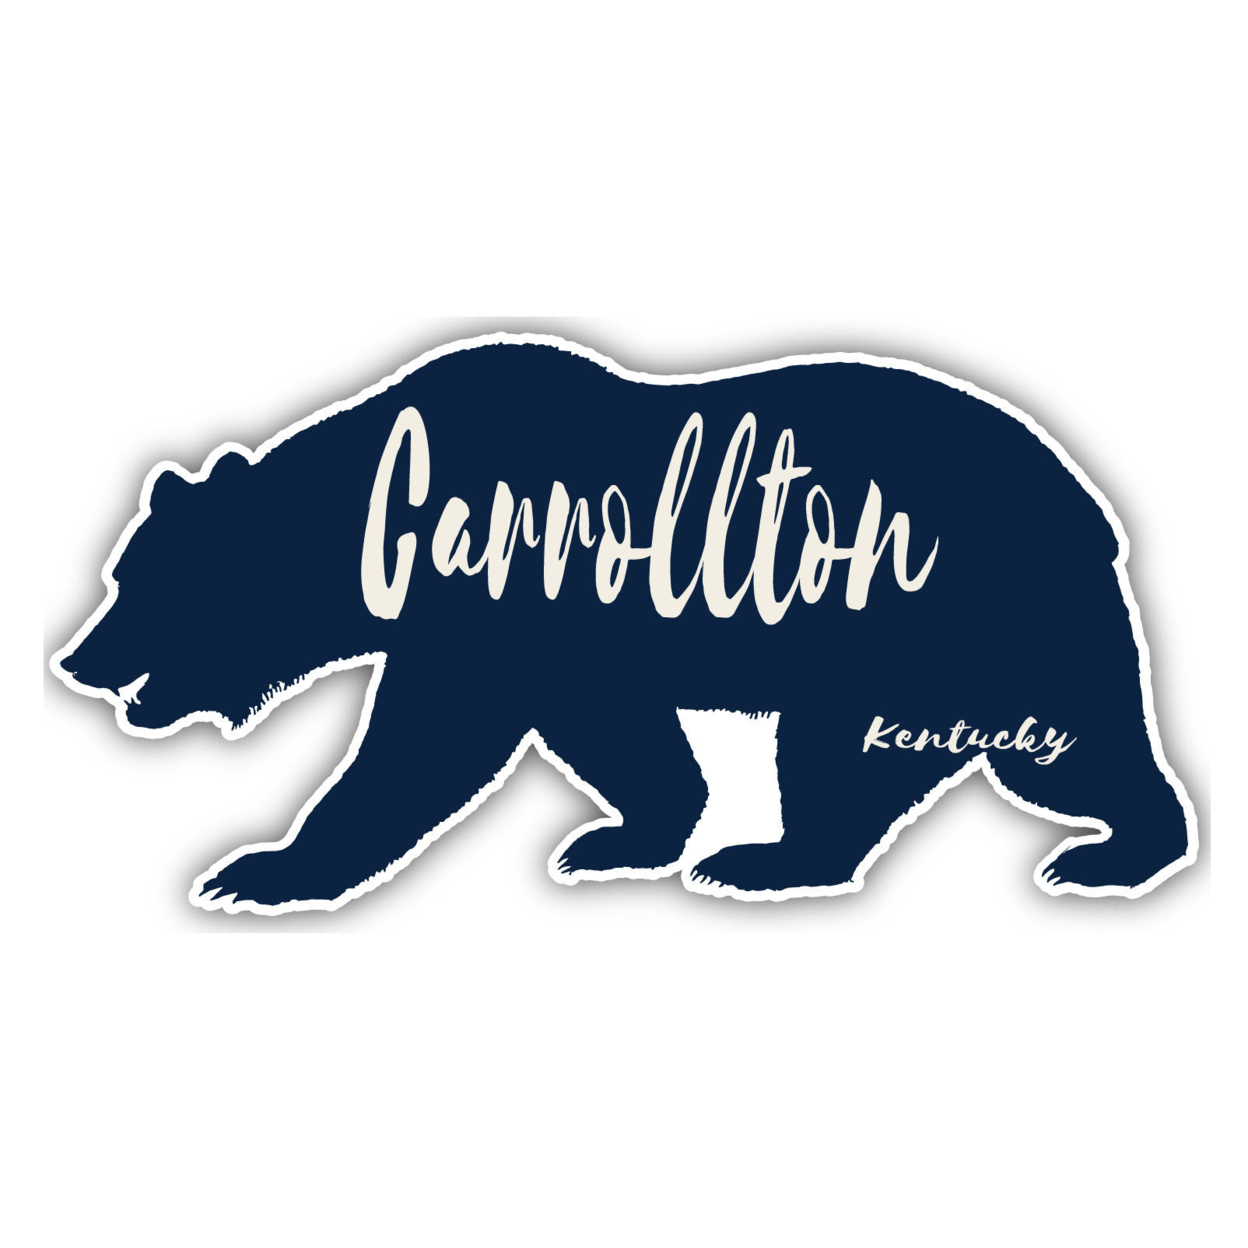 Carrollton Kentucky Souvenir Decorative Stickers (Choose Theme And Size) - 4-Pack, 6-Inch, Great Outdoors